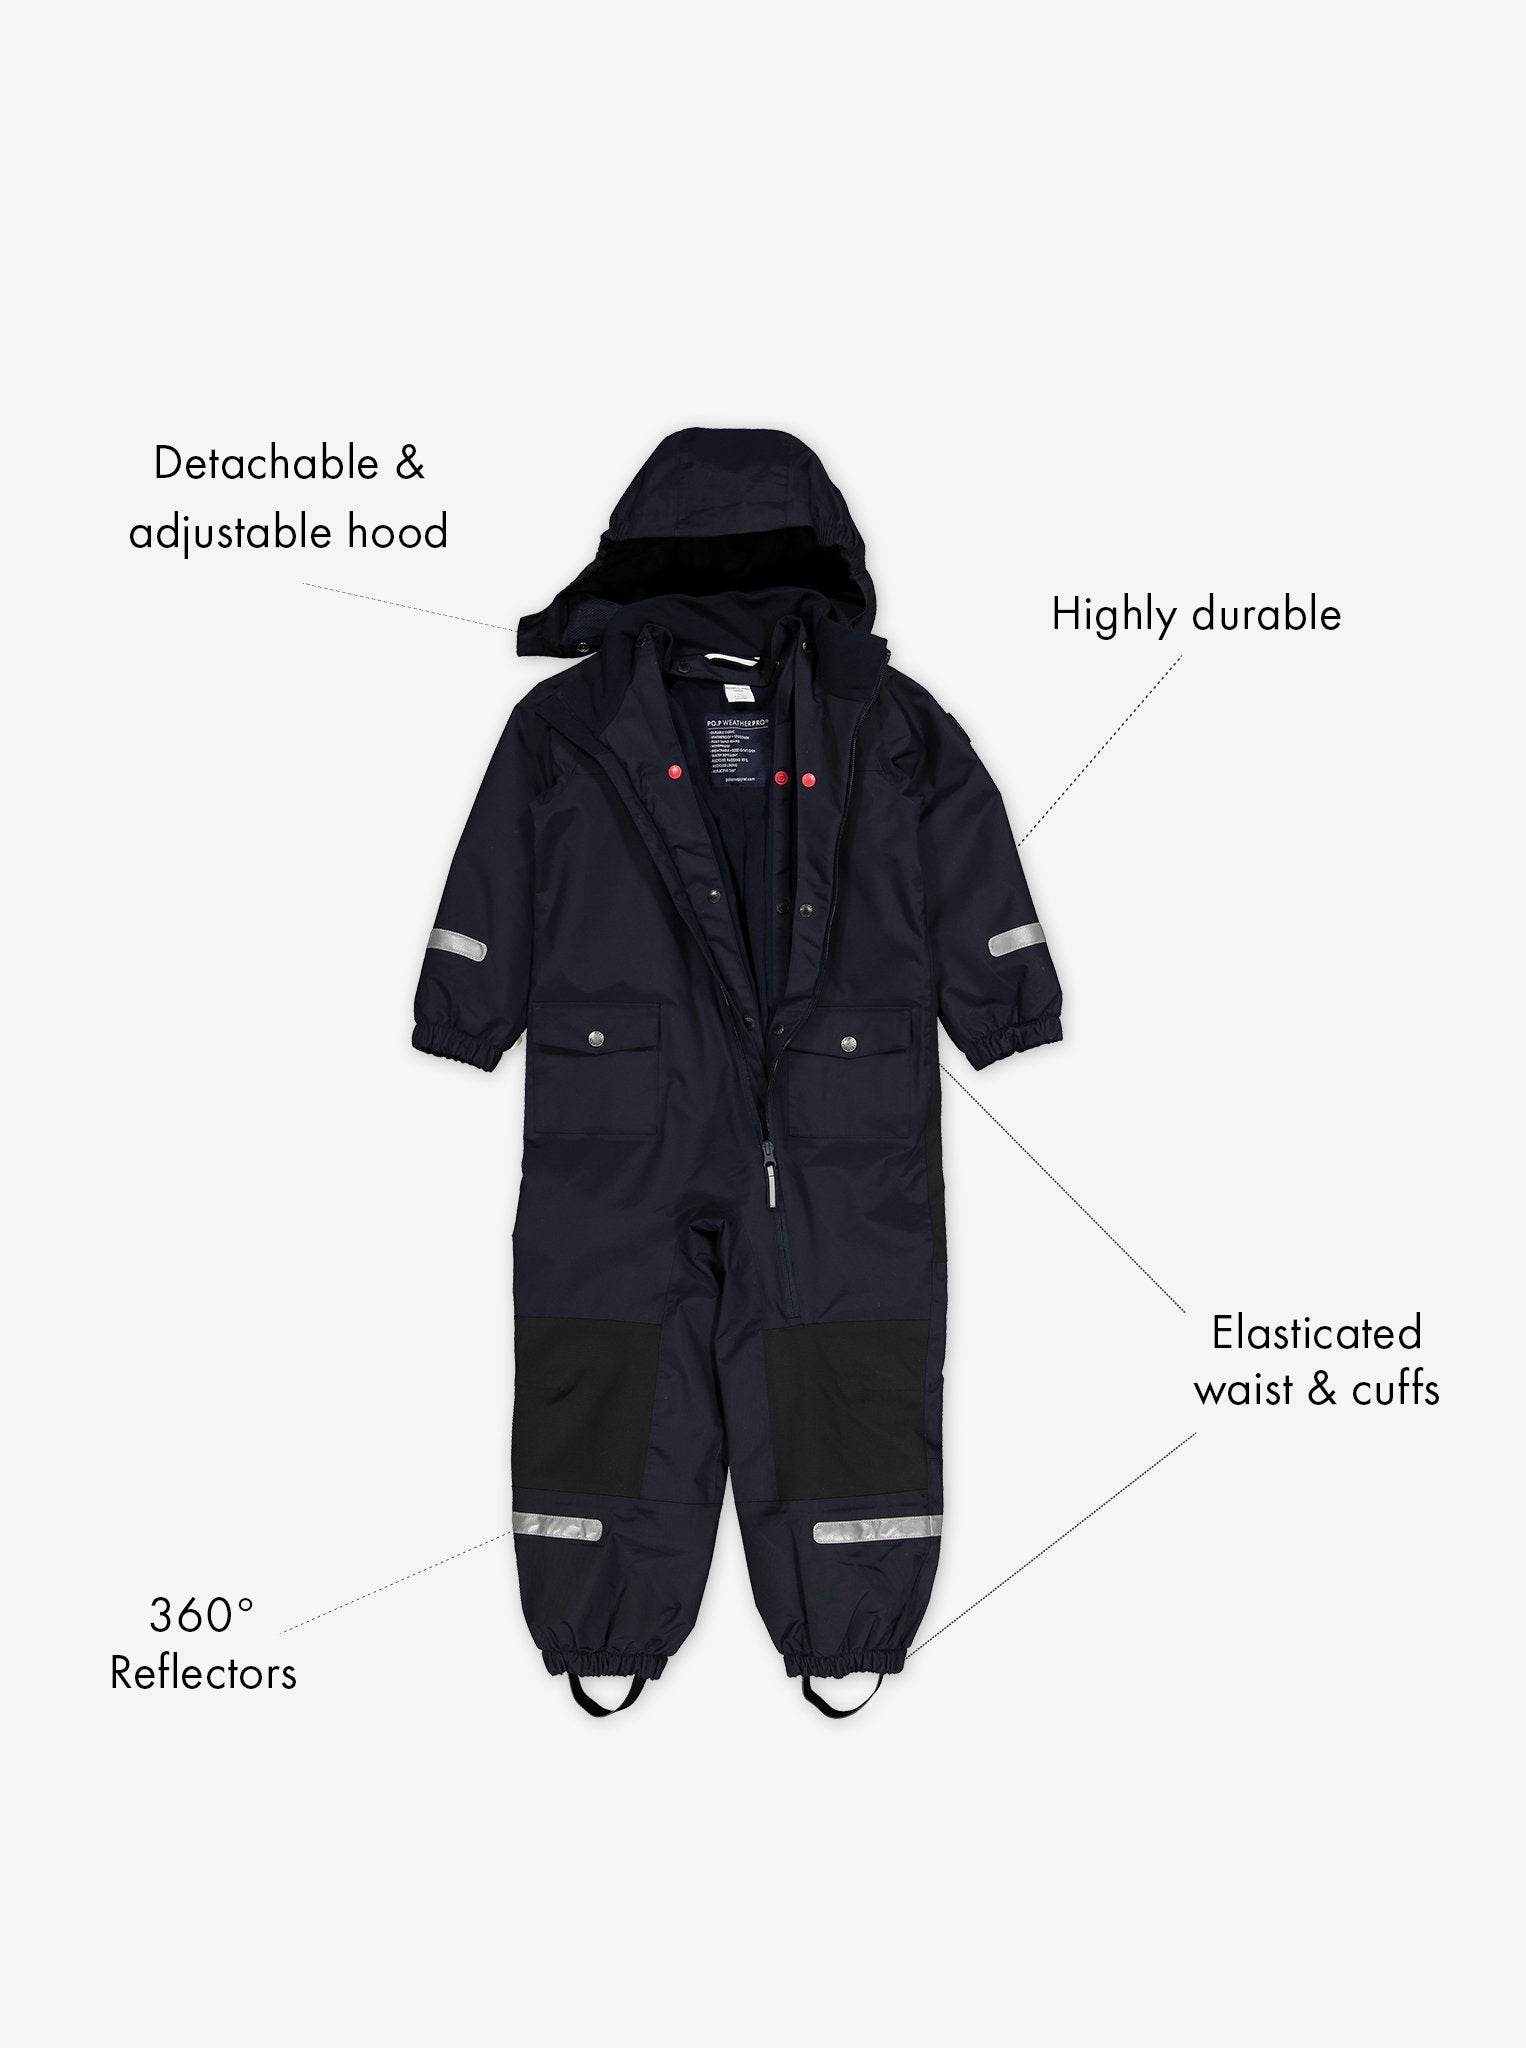 waterproof shell jumpsuit fleece lined, durable warm and comfortable, ethical long lasting polarn o. pyret showing functions 